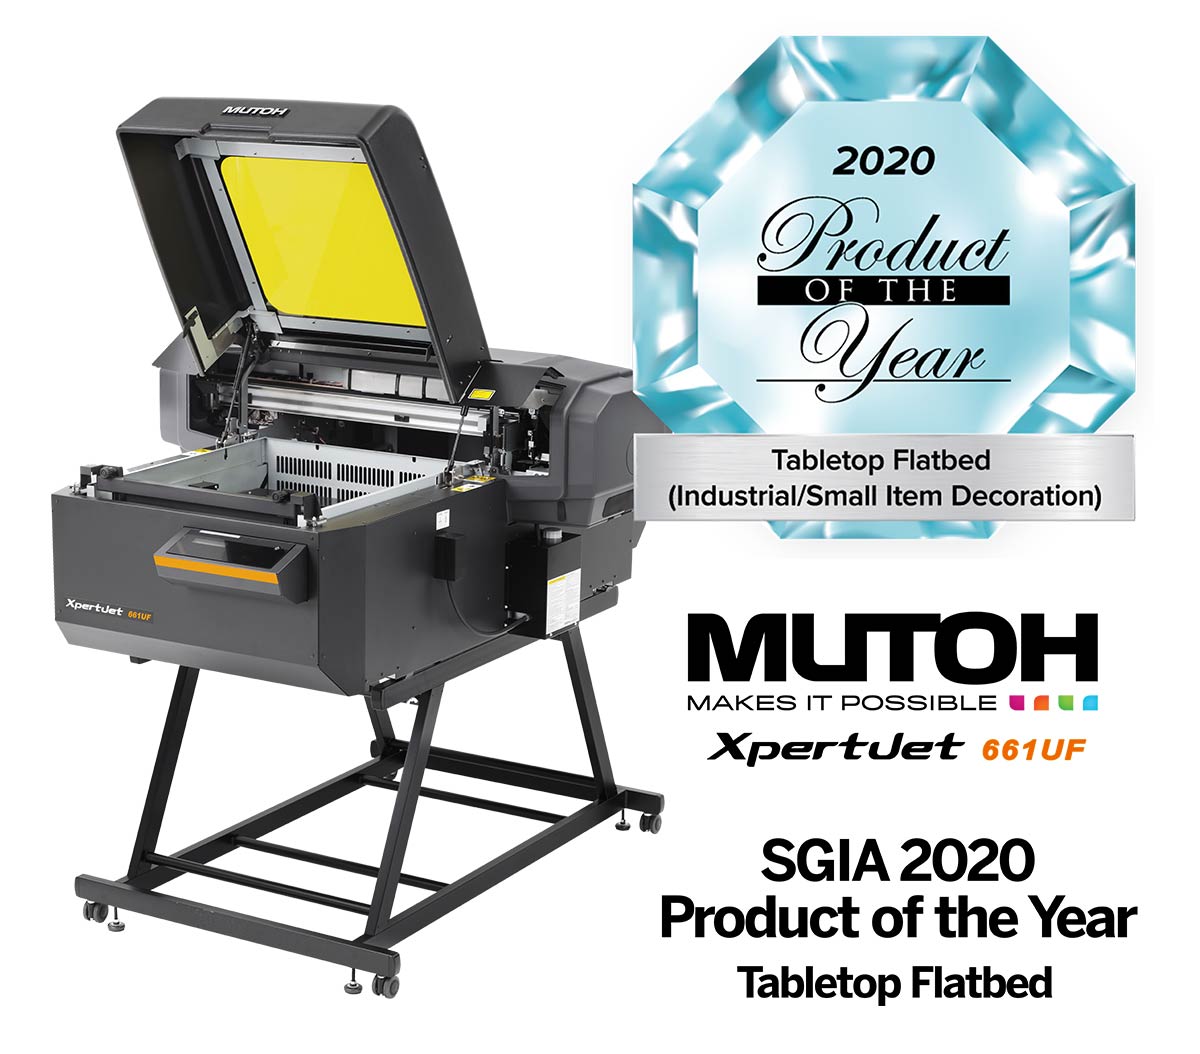 picture of the mutoh 661UF sgia product of the year